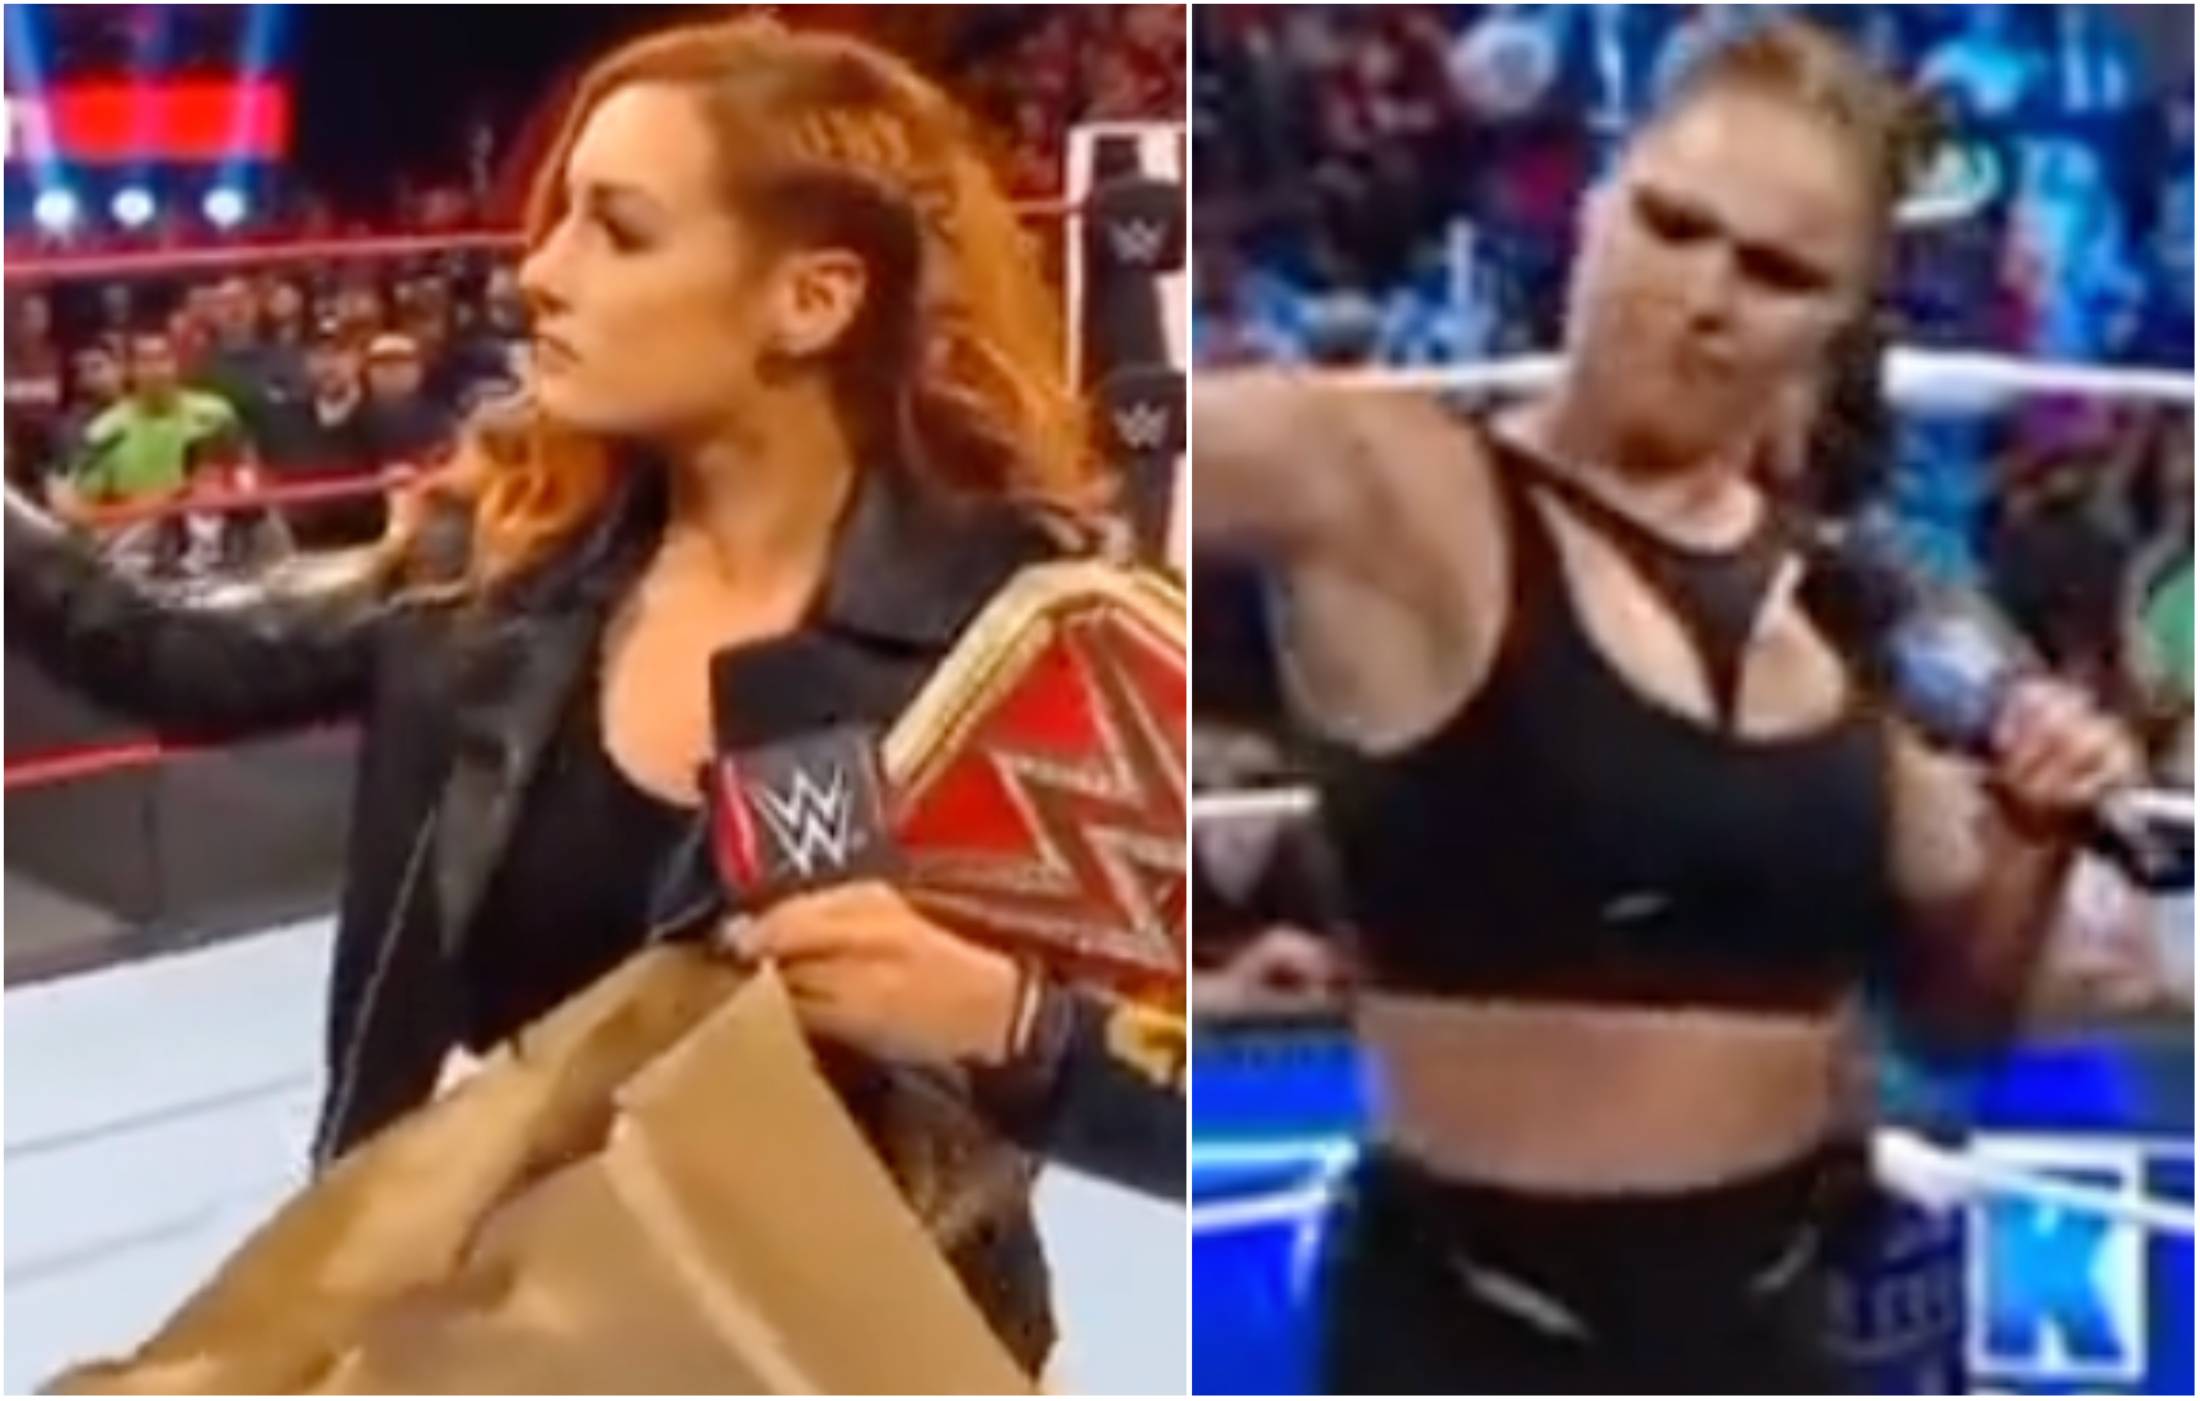 Ronda Rousey copied one of Becky Lynch's segments